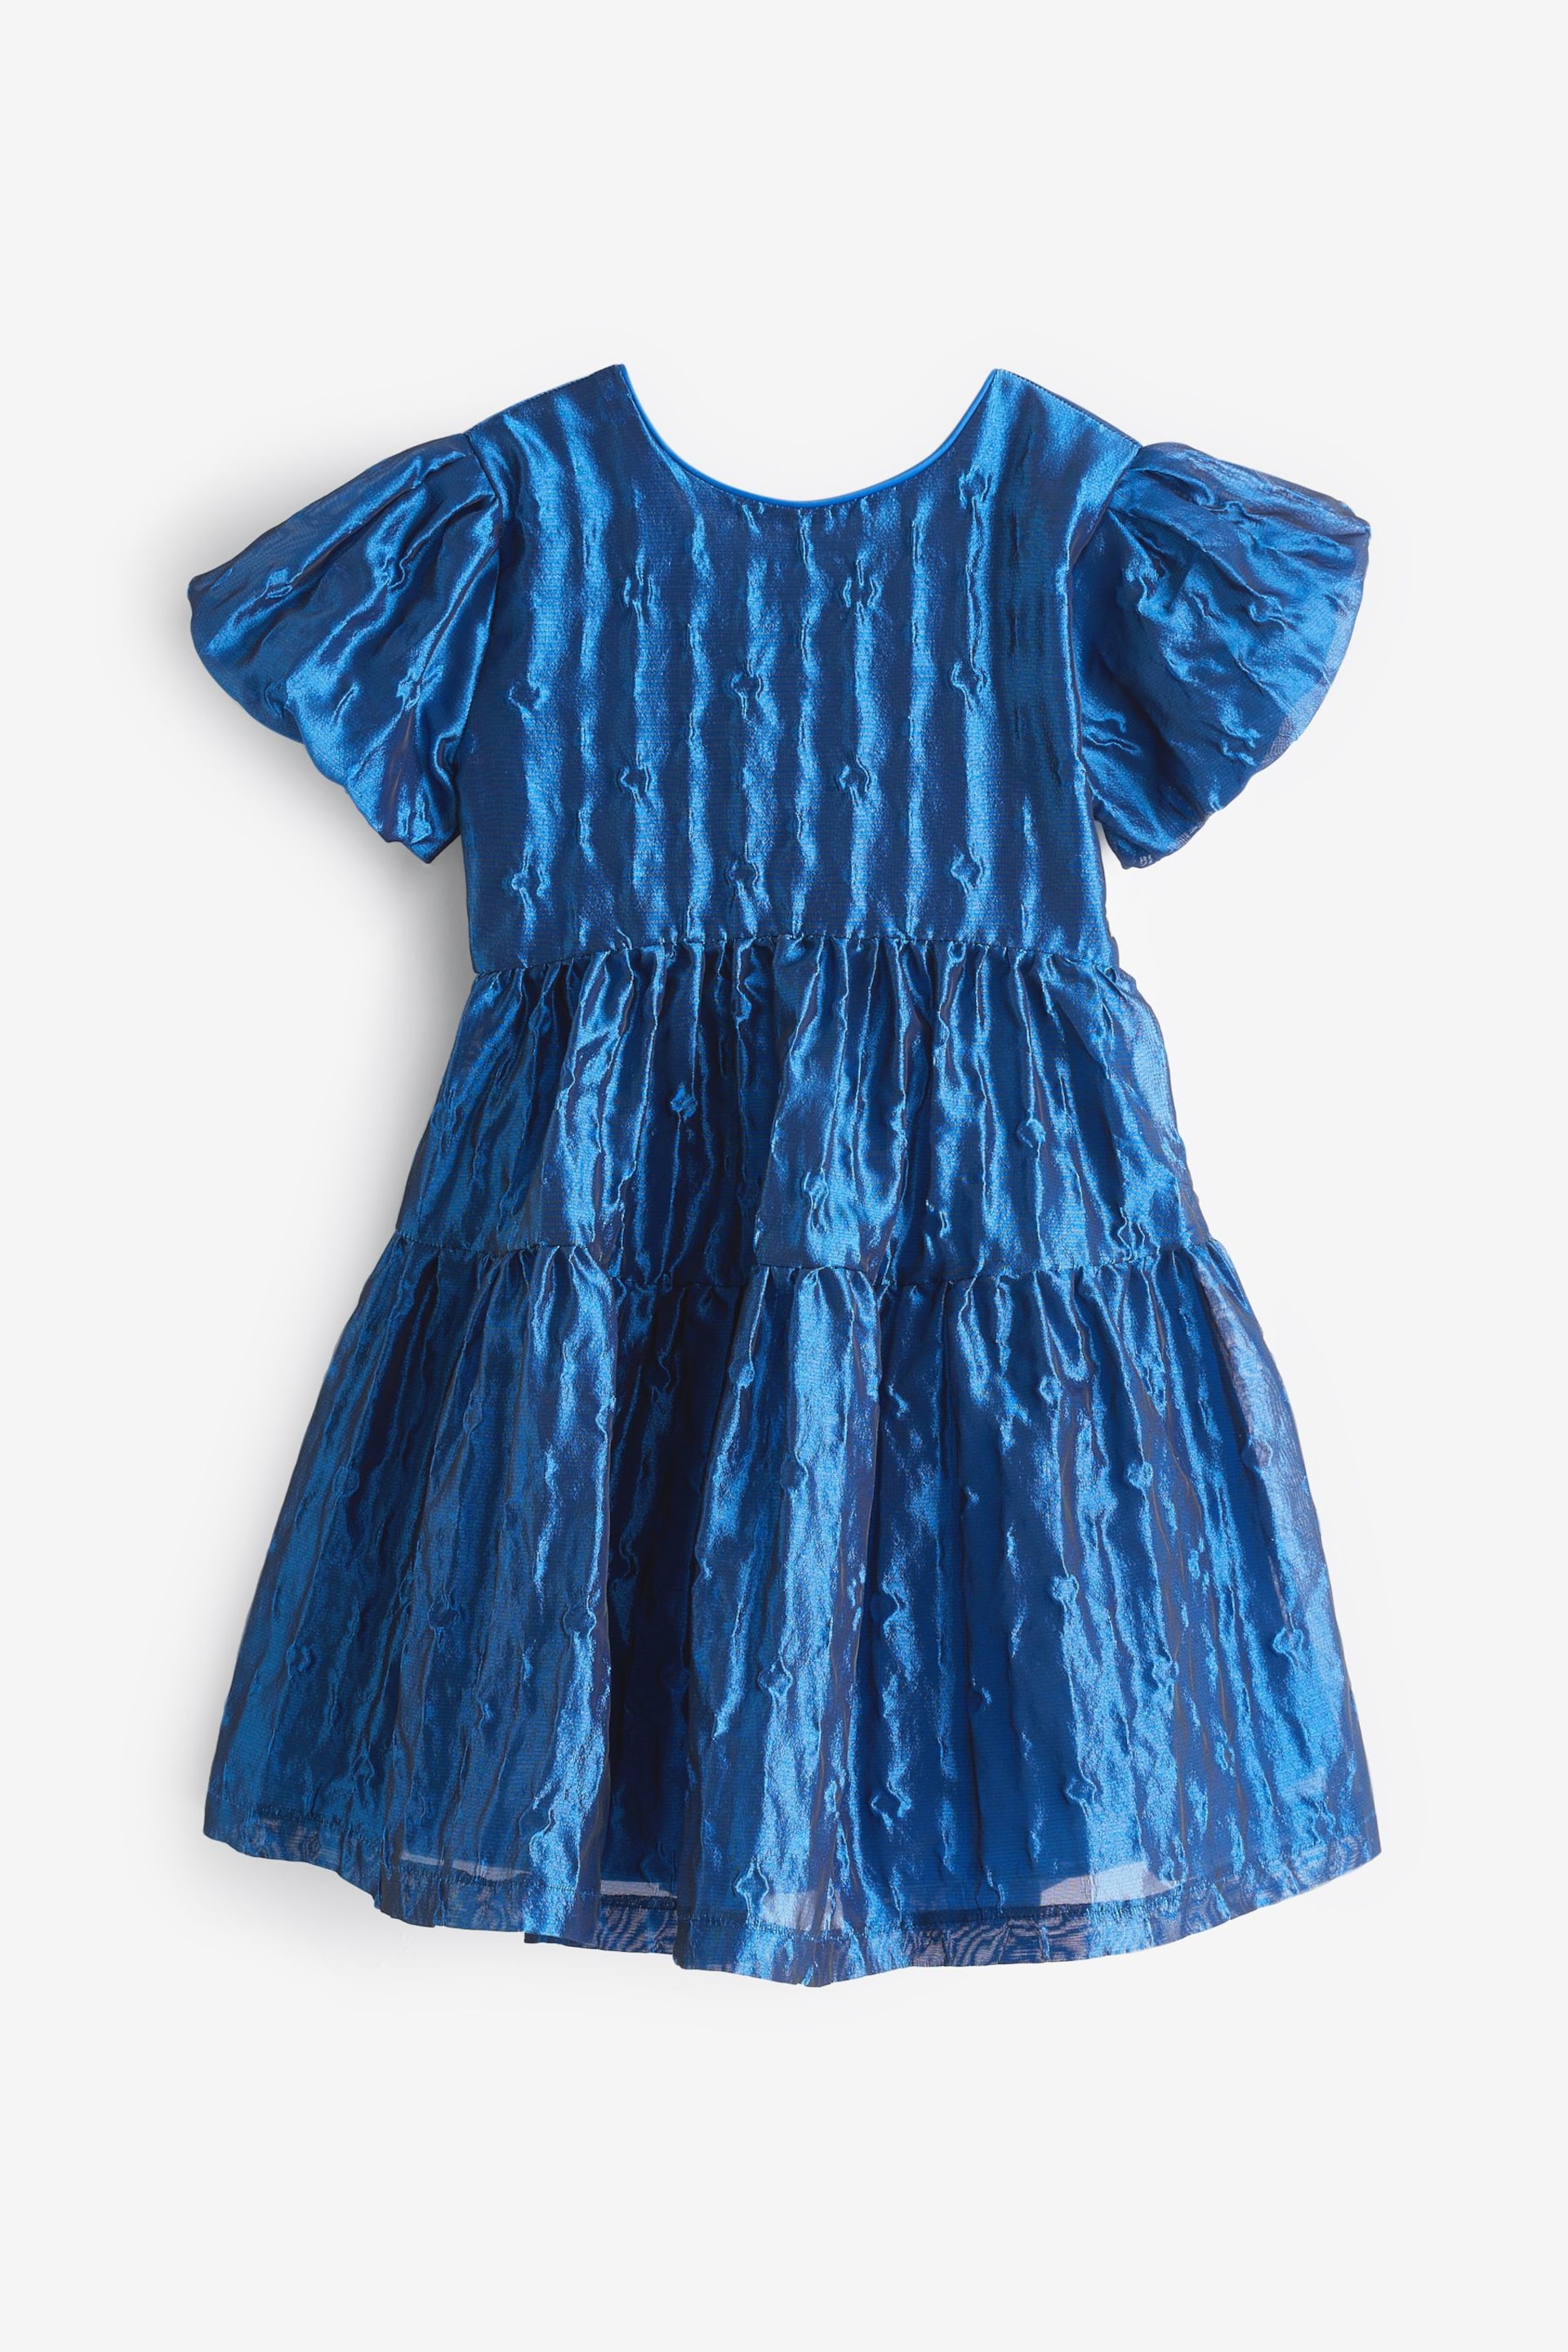 Baker by Ted Baker Blue Cloque Dress - Image 6 of 10